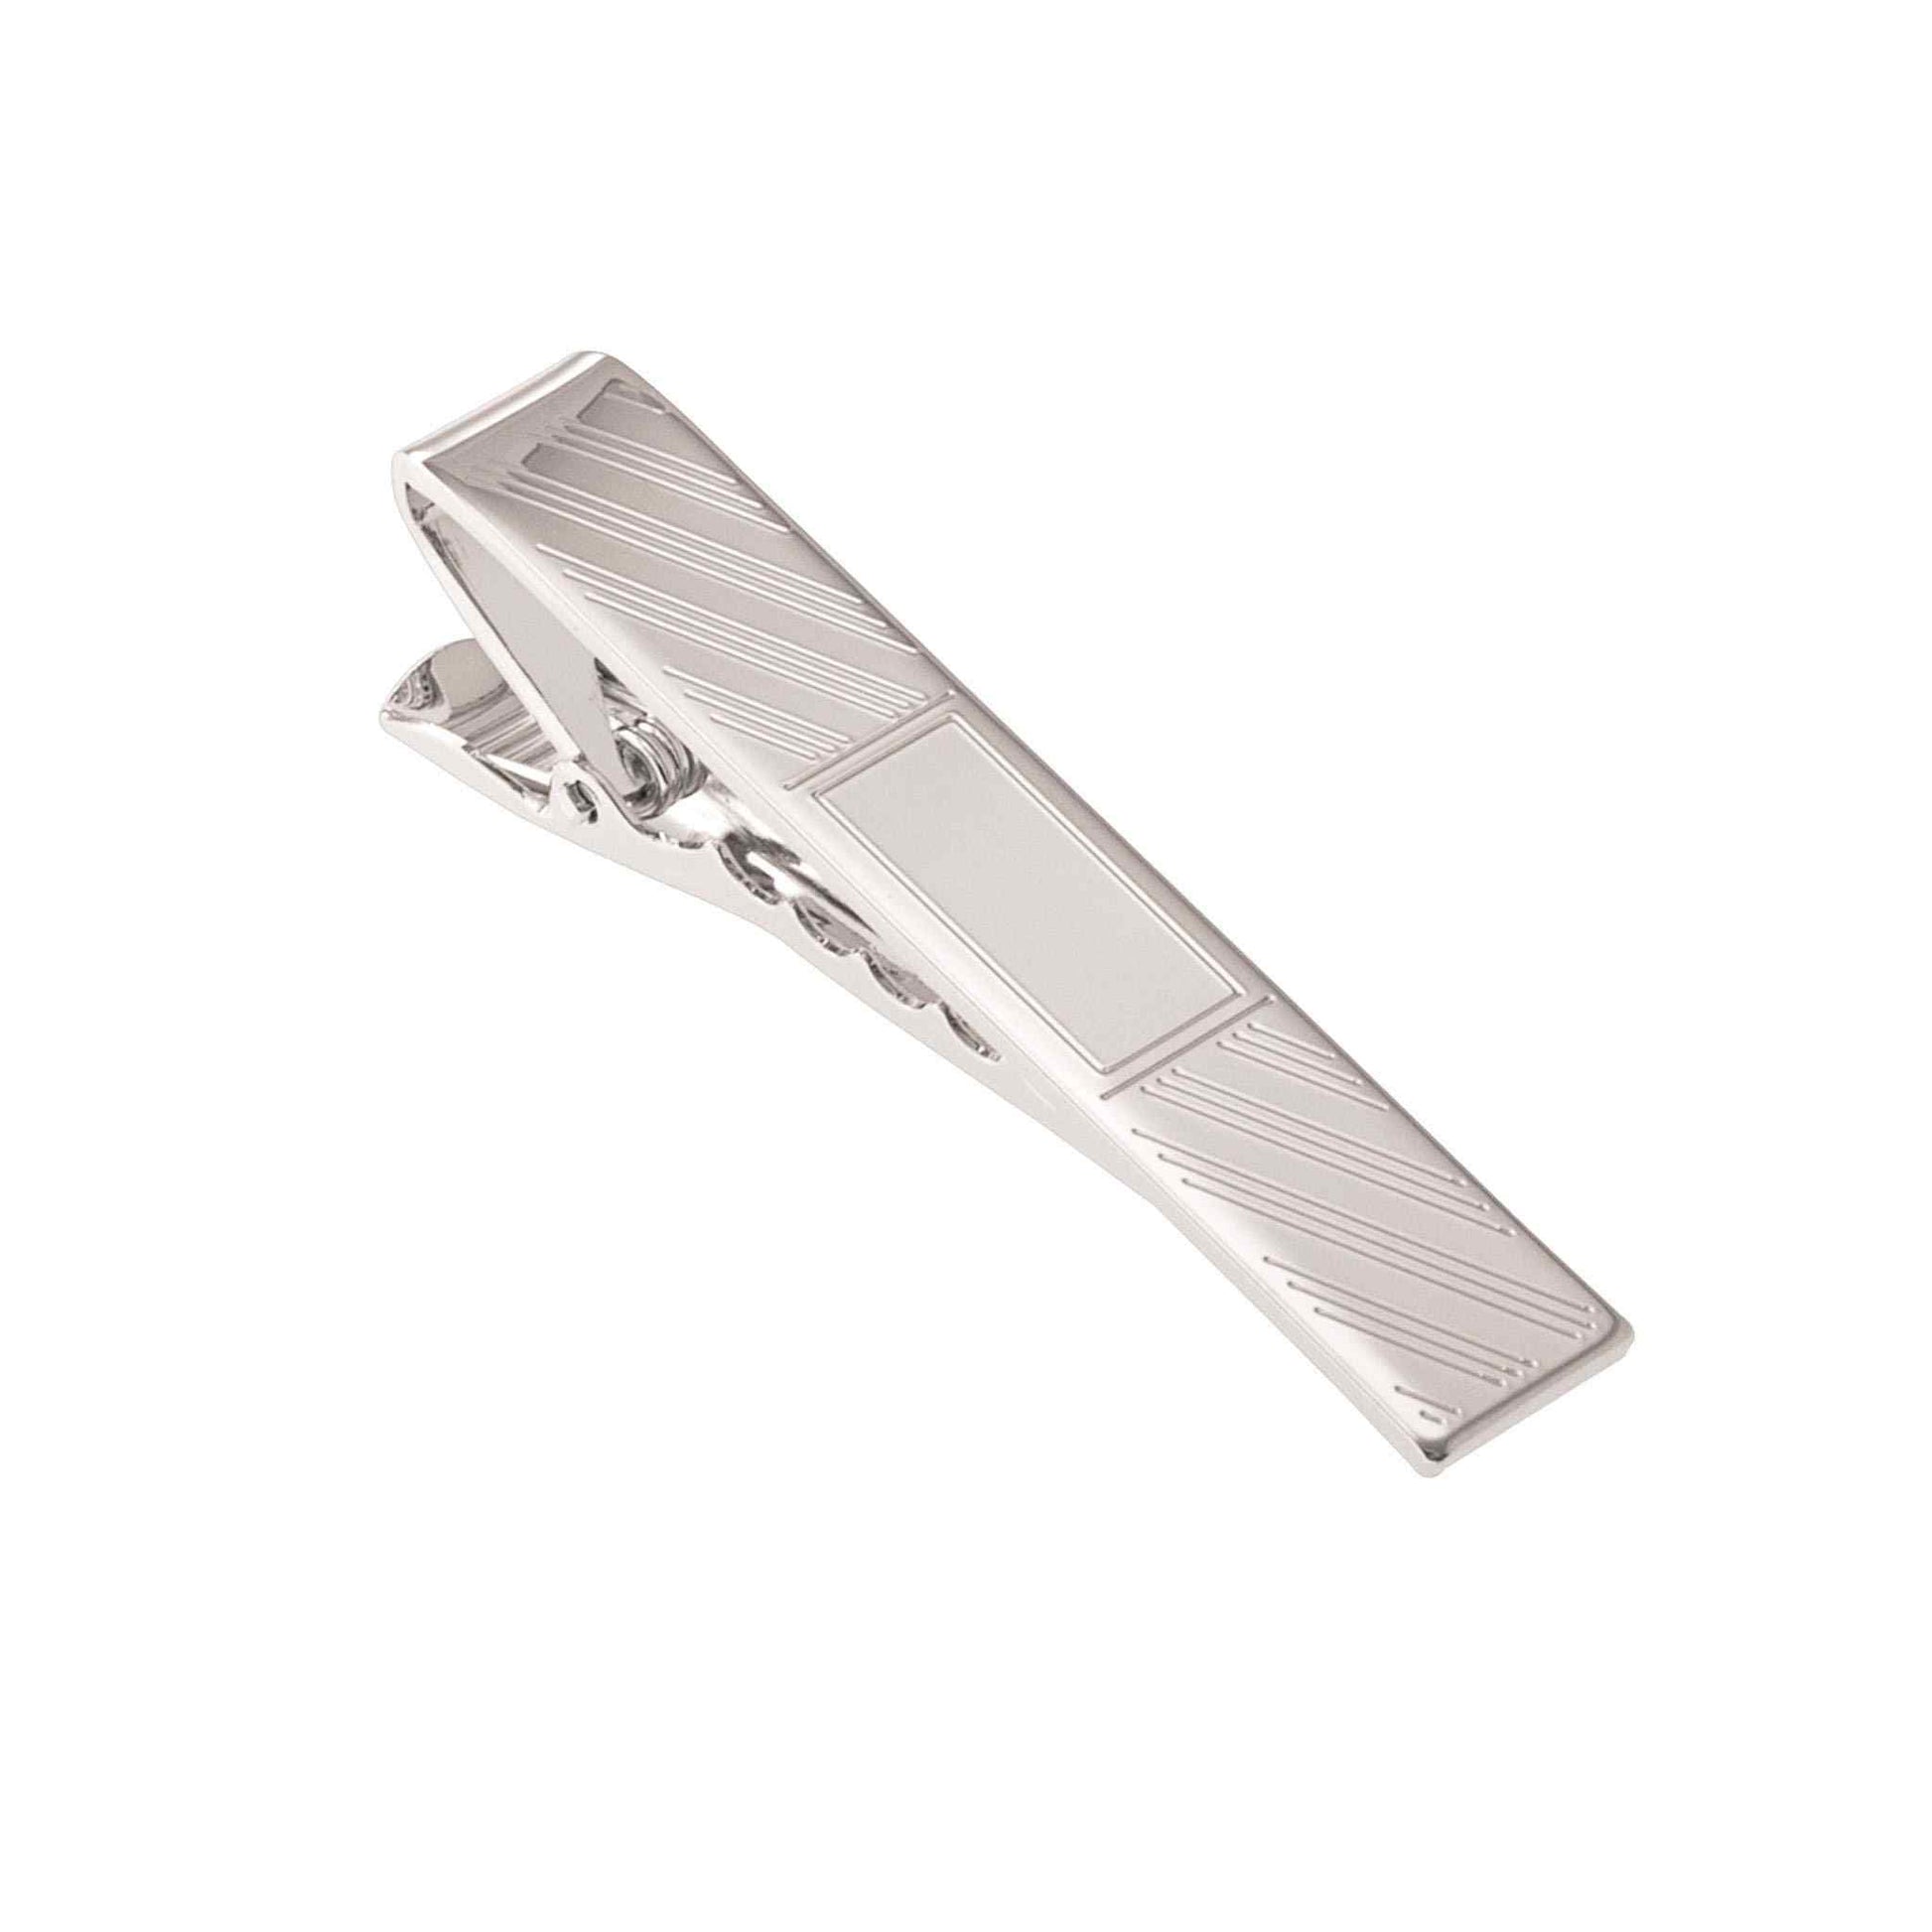 A lined tie bar with center square displayed on a neutral white background.